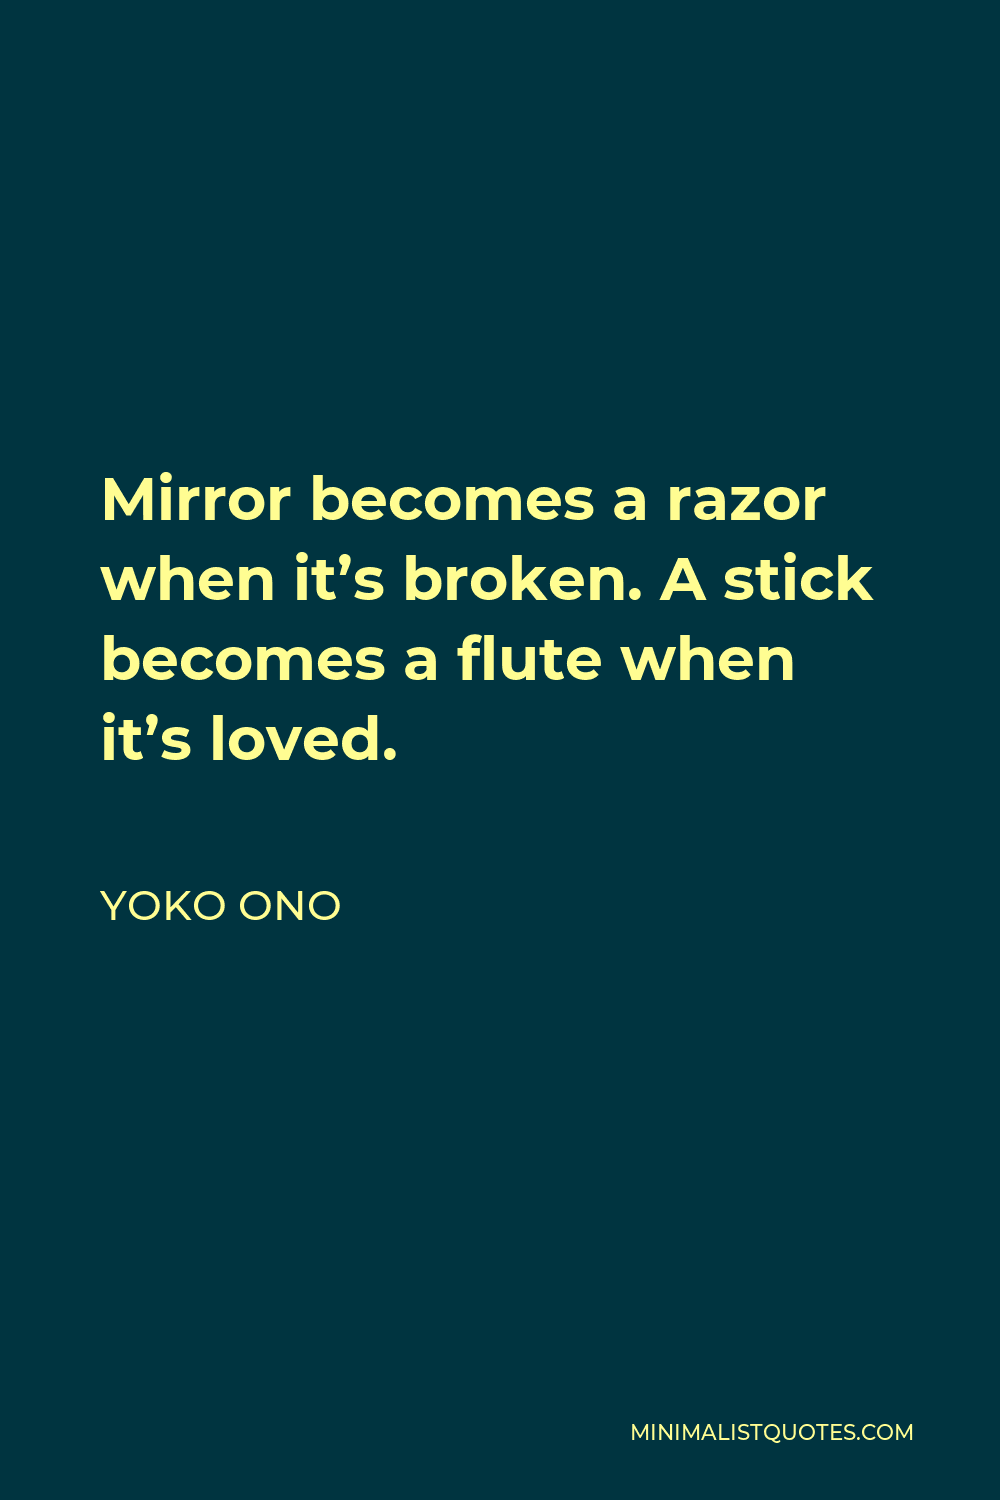 Yoko Ono Quote - Mirror becomes a razor when it’s broken. A stick becomes a flute when it’s loved.